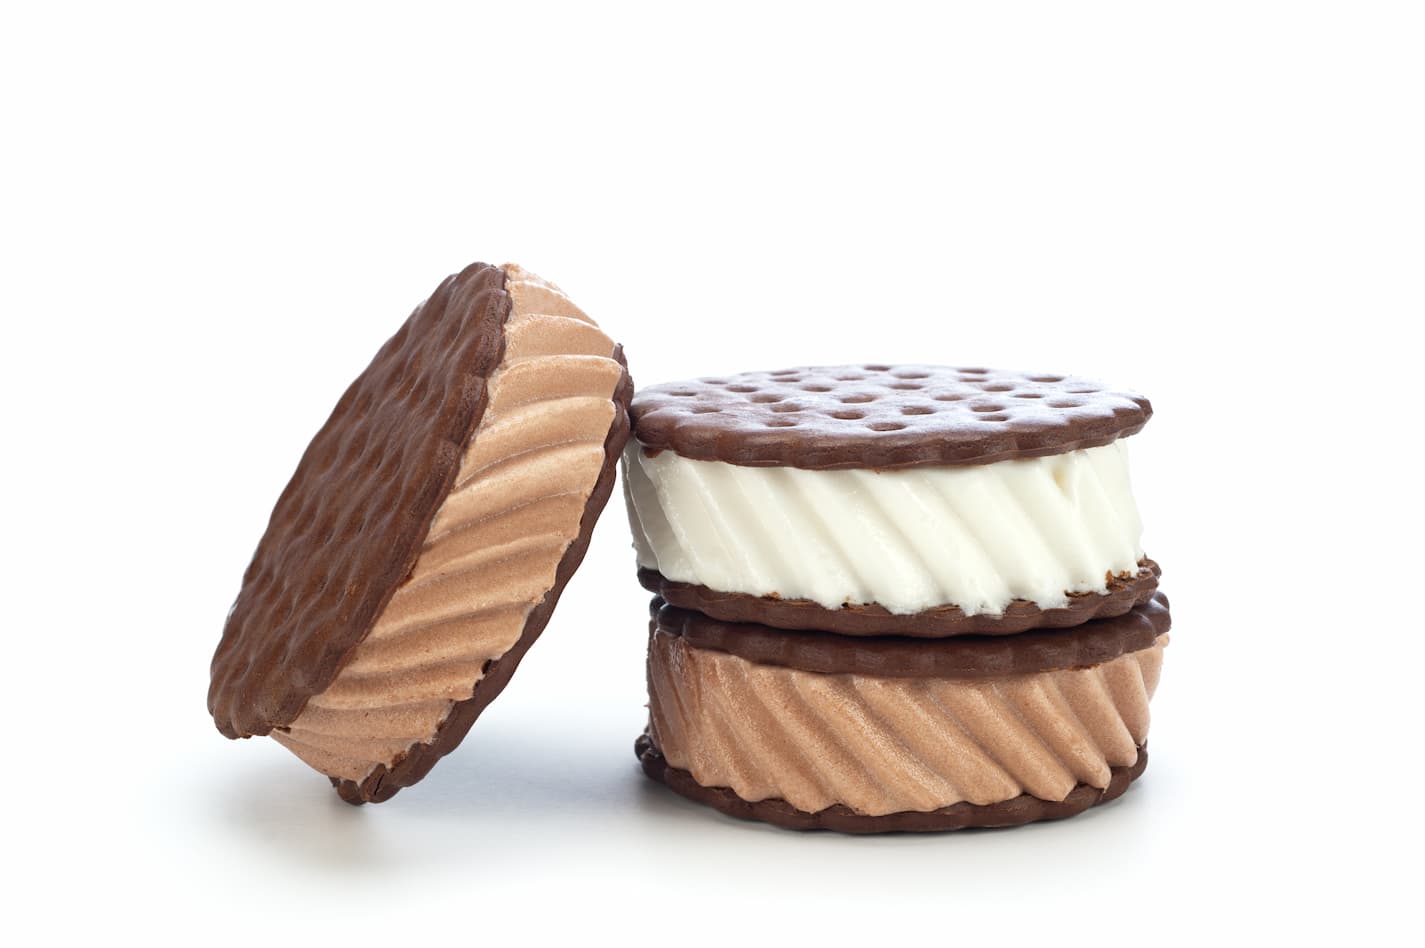 image of ice cream sandwiches before being freeze-dried